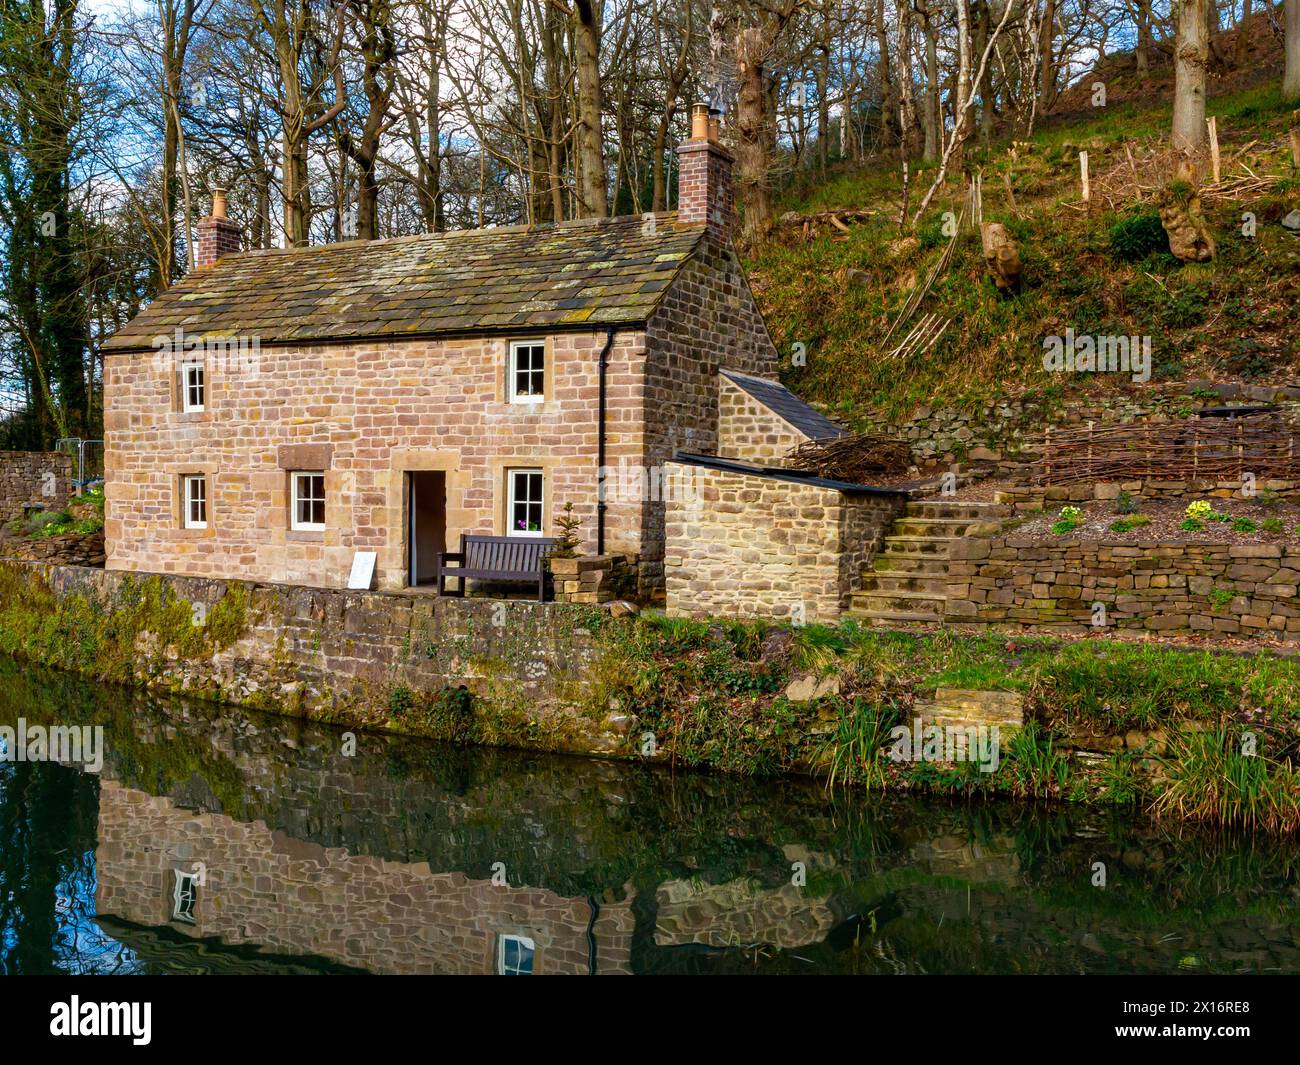 Exterior of Aqueduct Cottage a restored grade ii listed building on the Cromford Canal near Whatstandwell Derbyshire Peak District England UK Stock Photo